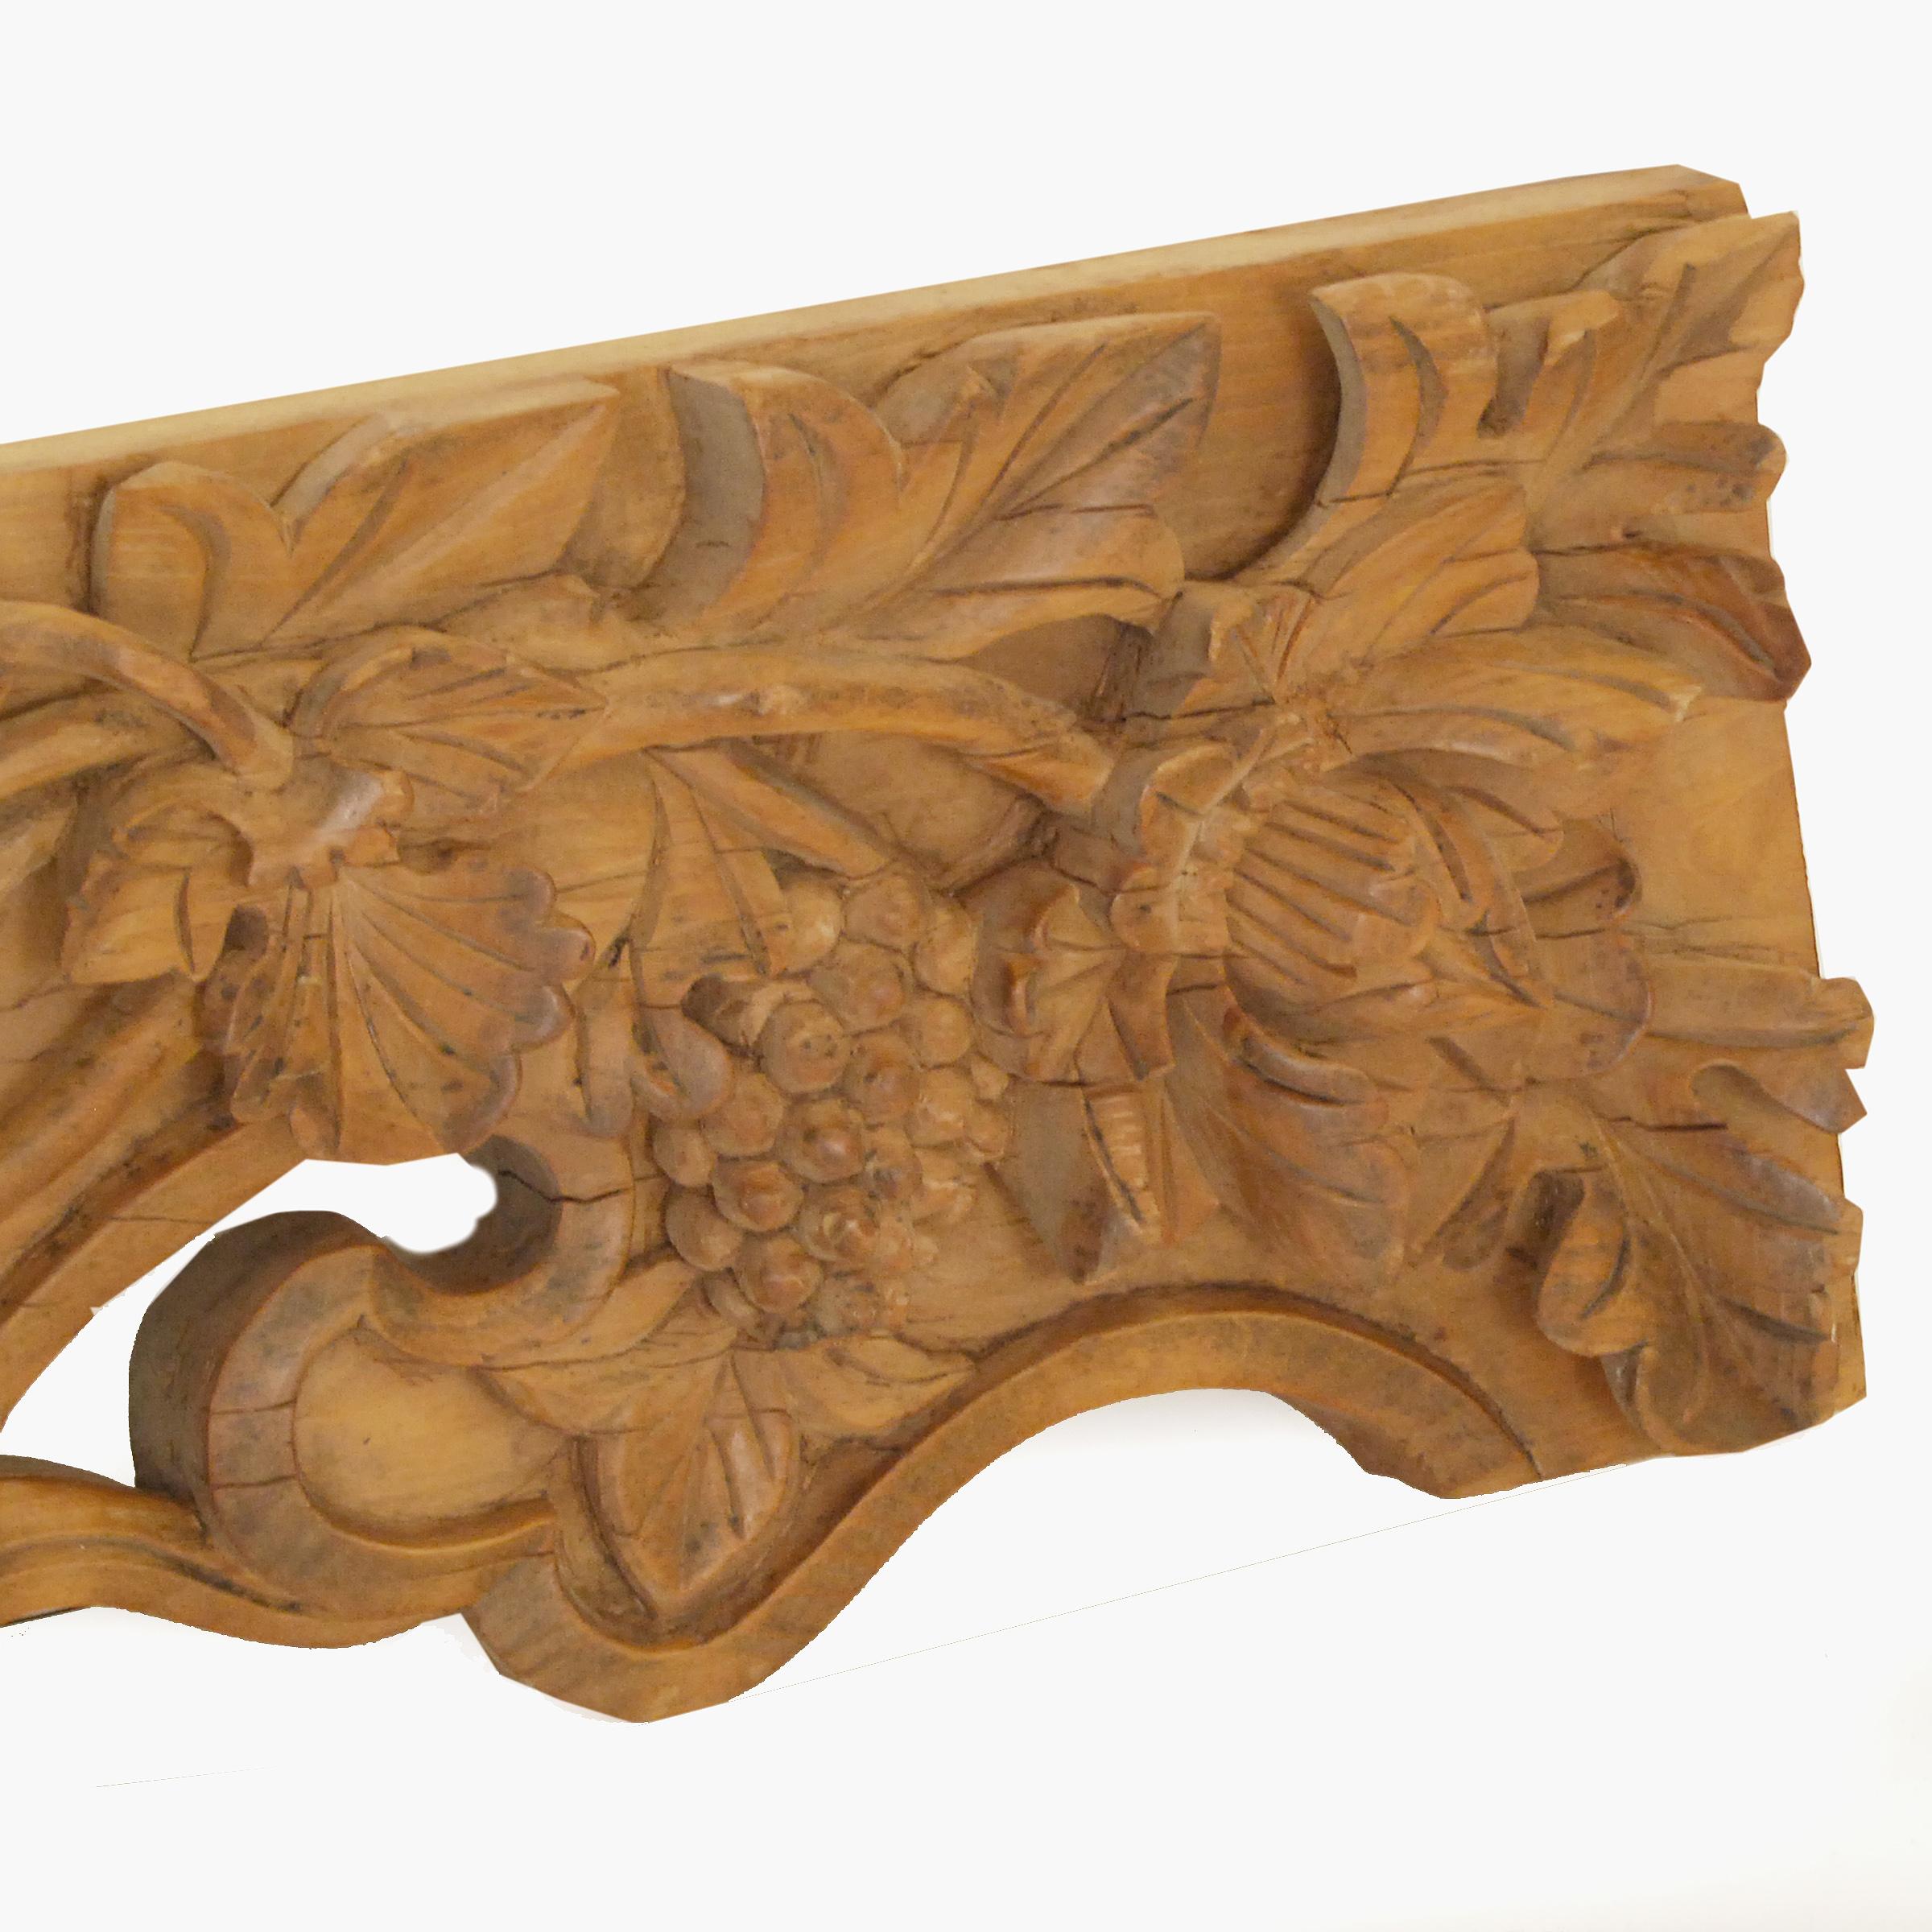 This architectural valance from the 19th century is beautifully carved in multiple dimensions with lotus, flora, and fruits on the vine and centered with a pearl of wisdom. It beautifully represents the masterful craftsmanship sought by 19th century